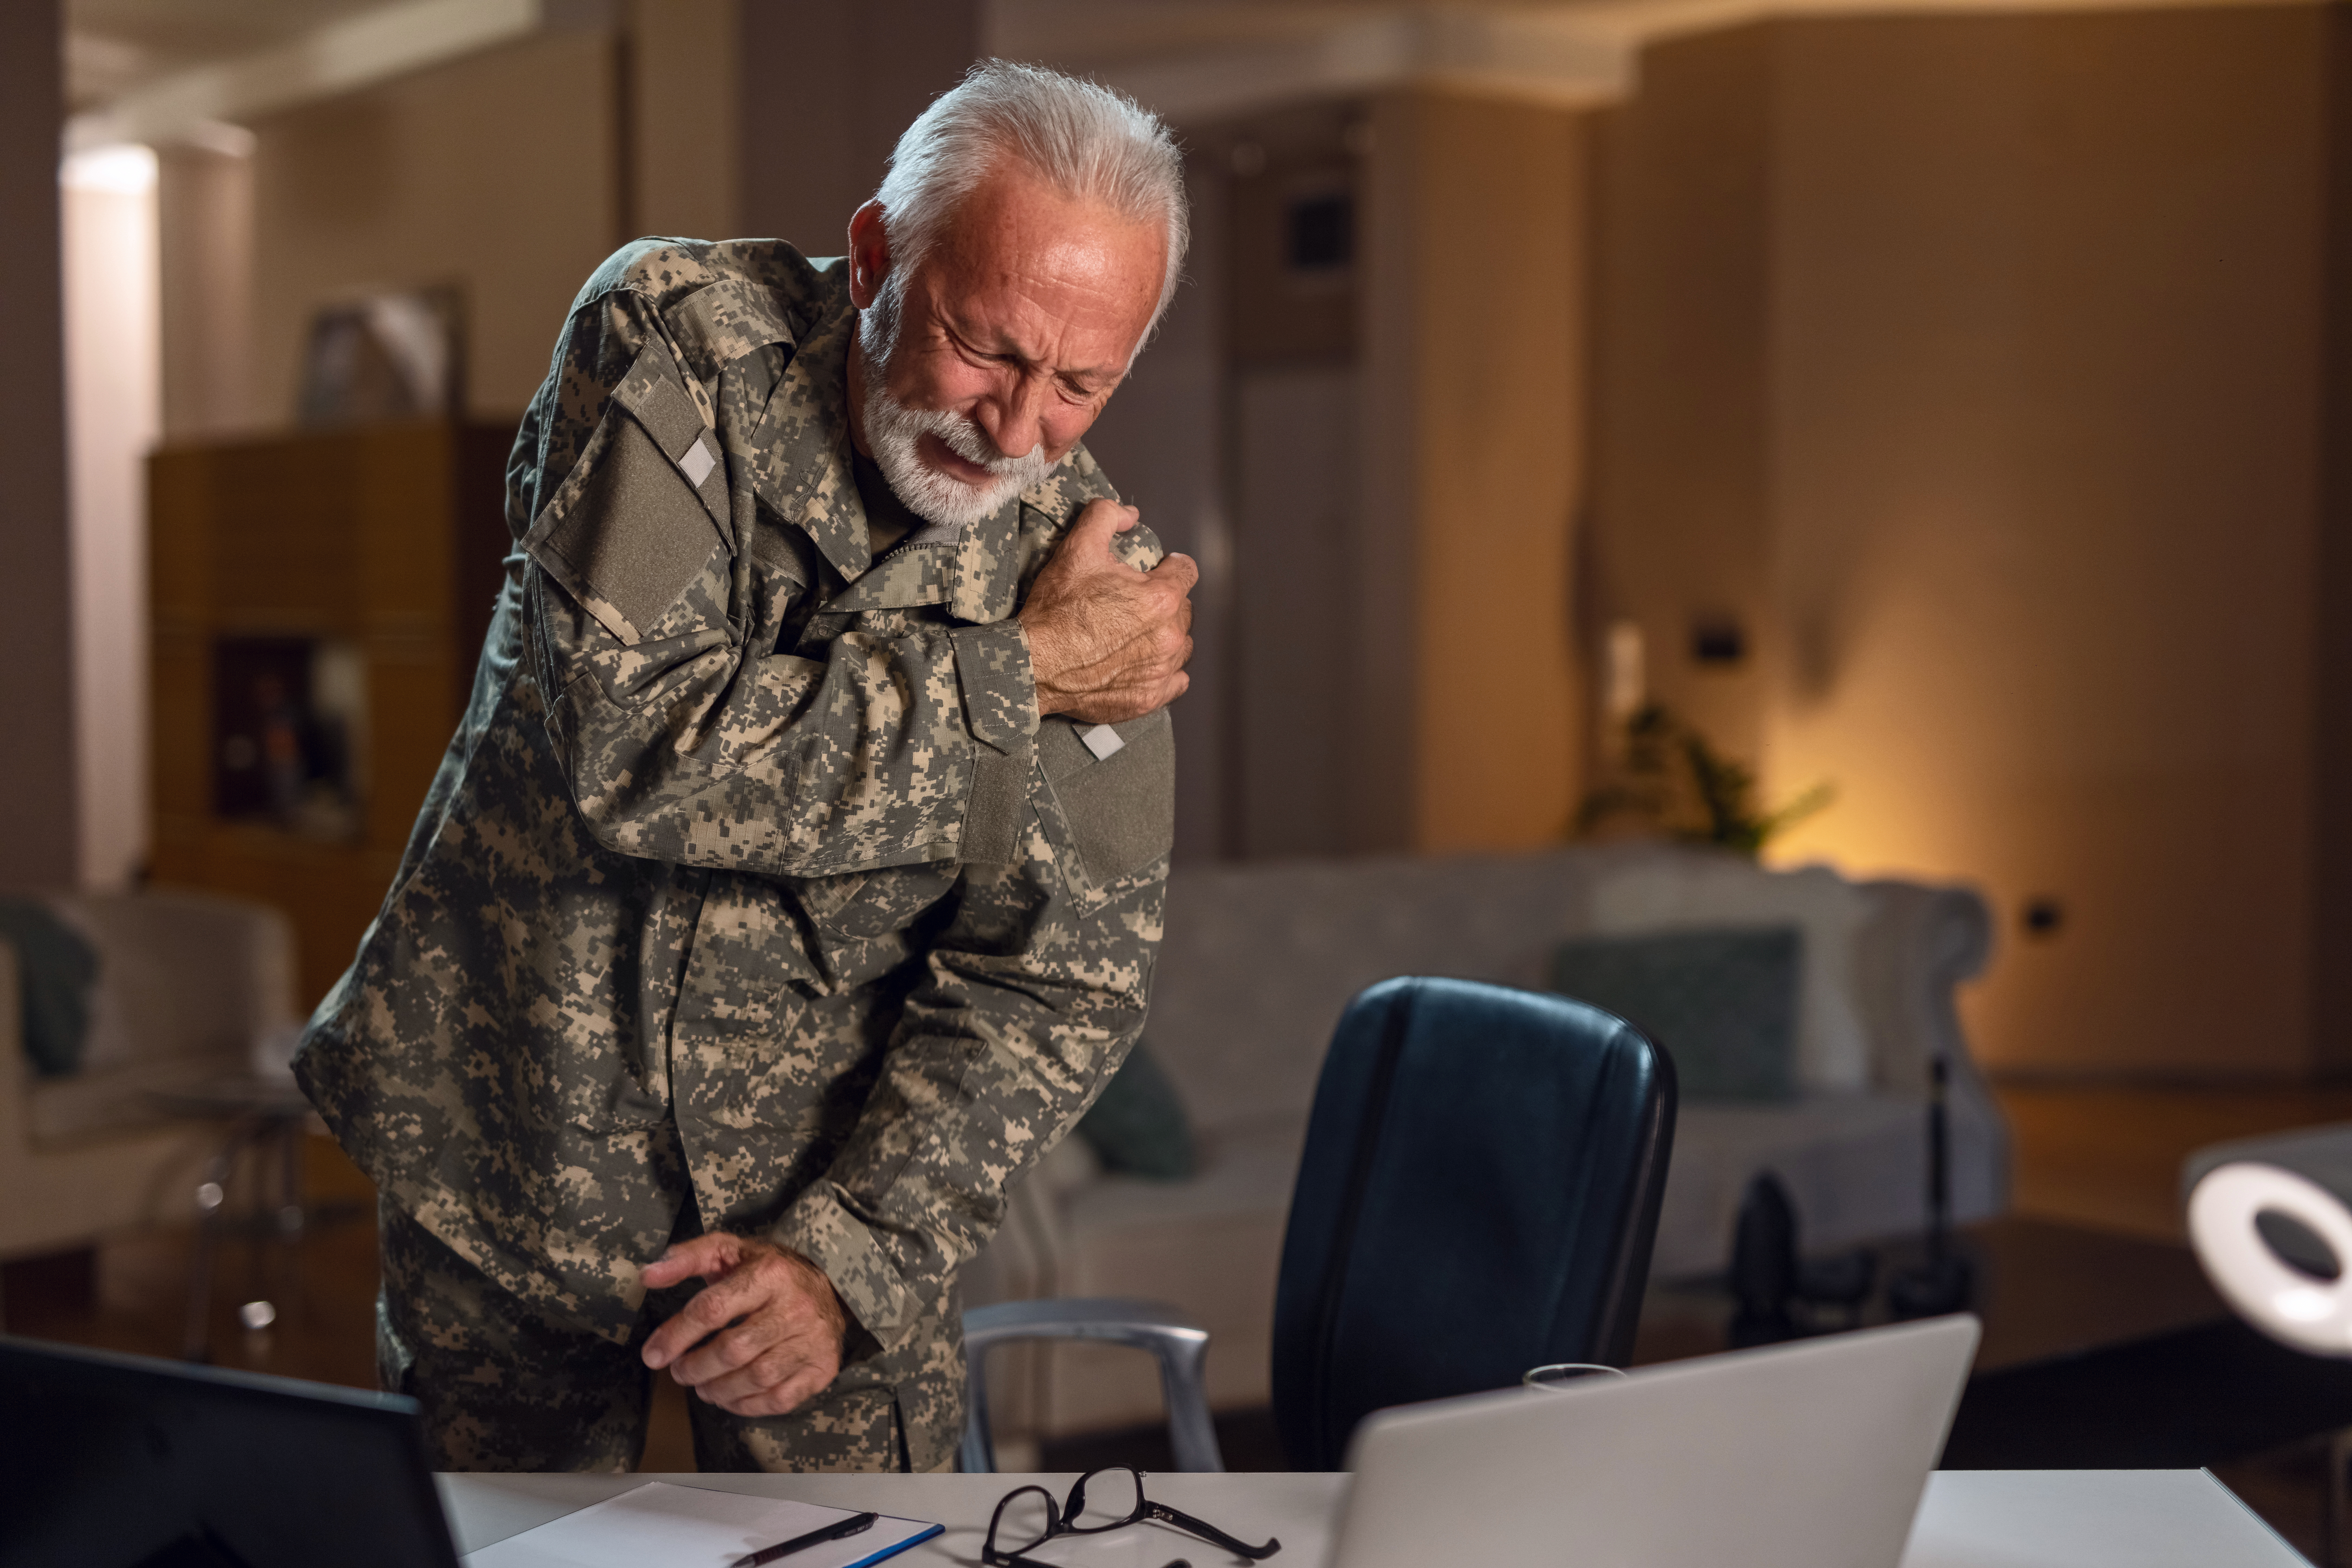 Mature military soldier suffering with fibromyalgia shoulder pain while being in the office.